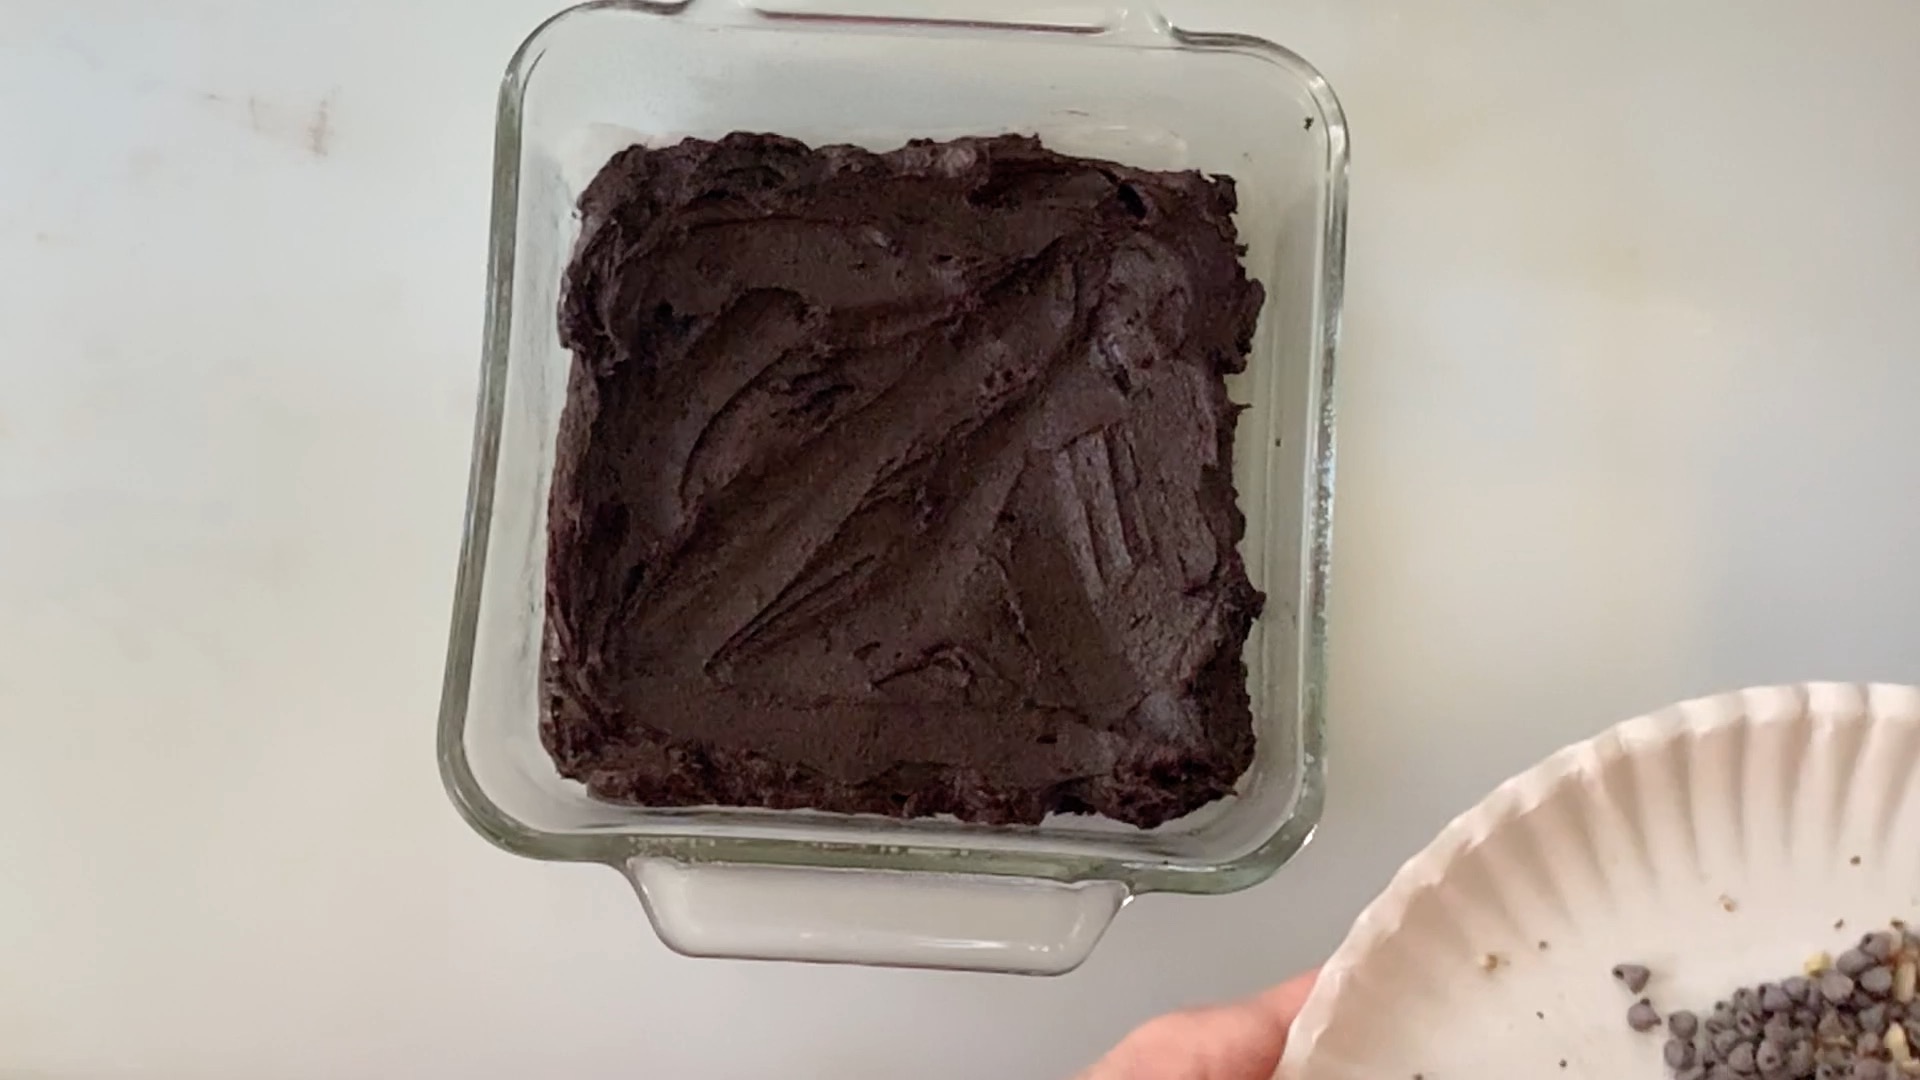 Spreading brownie batter in a glass dish.